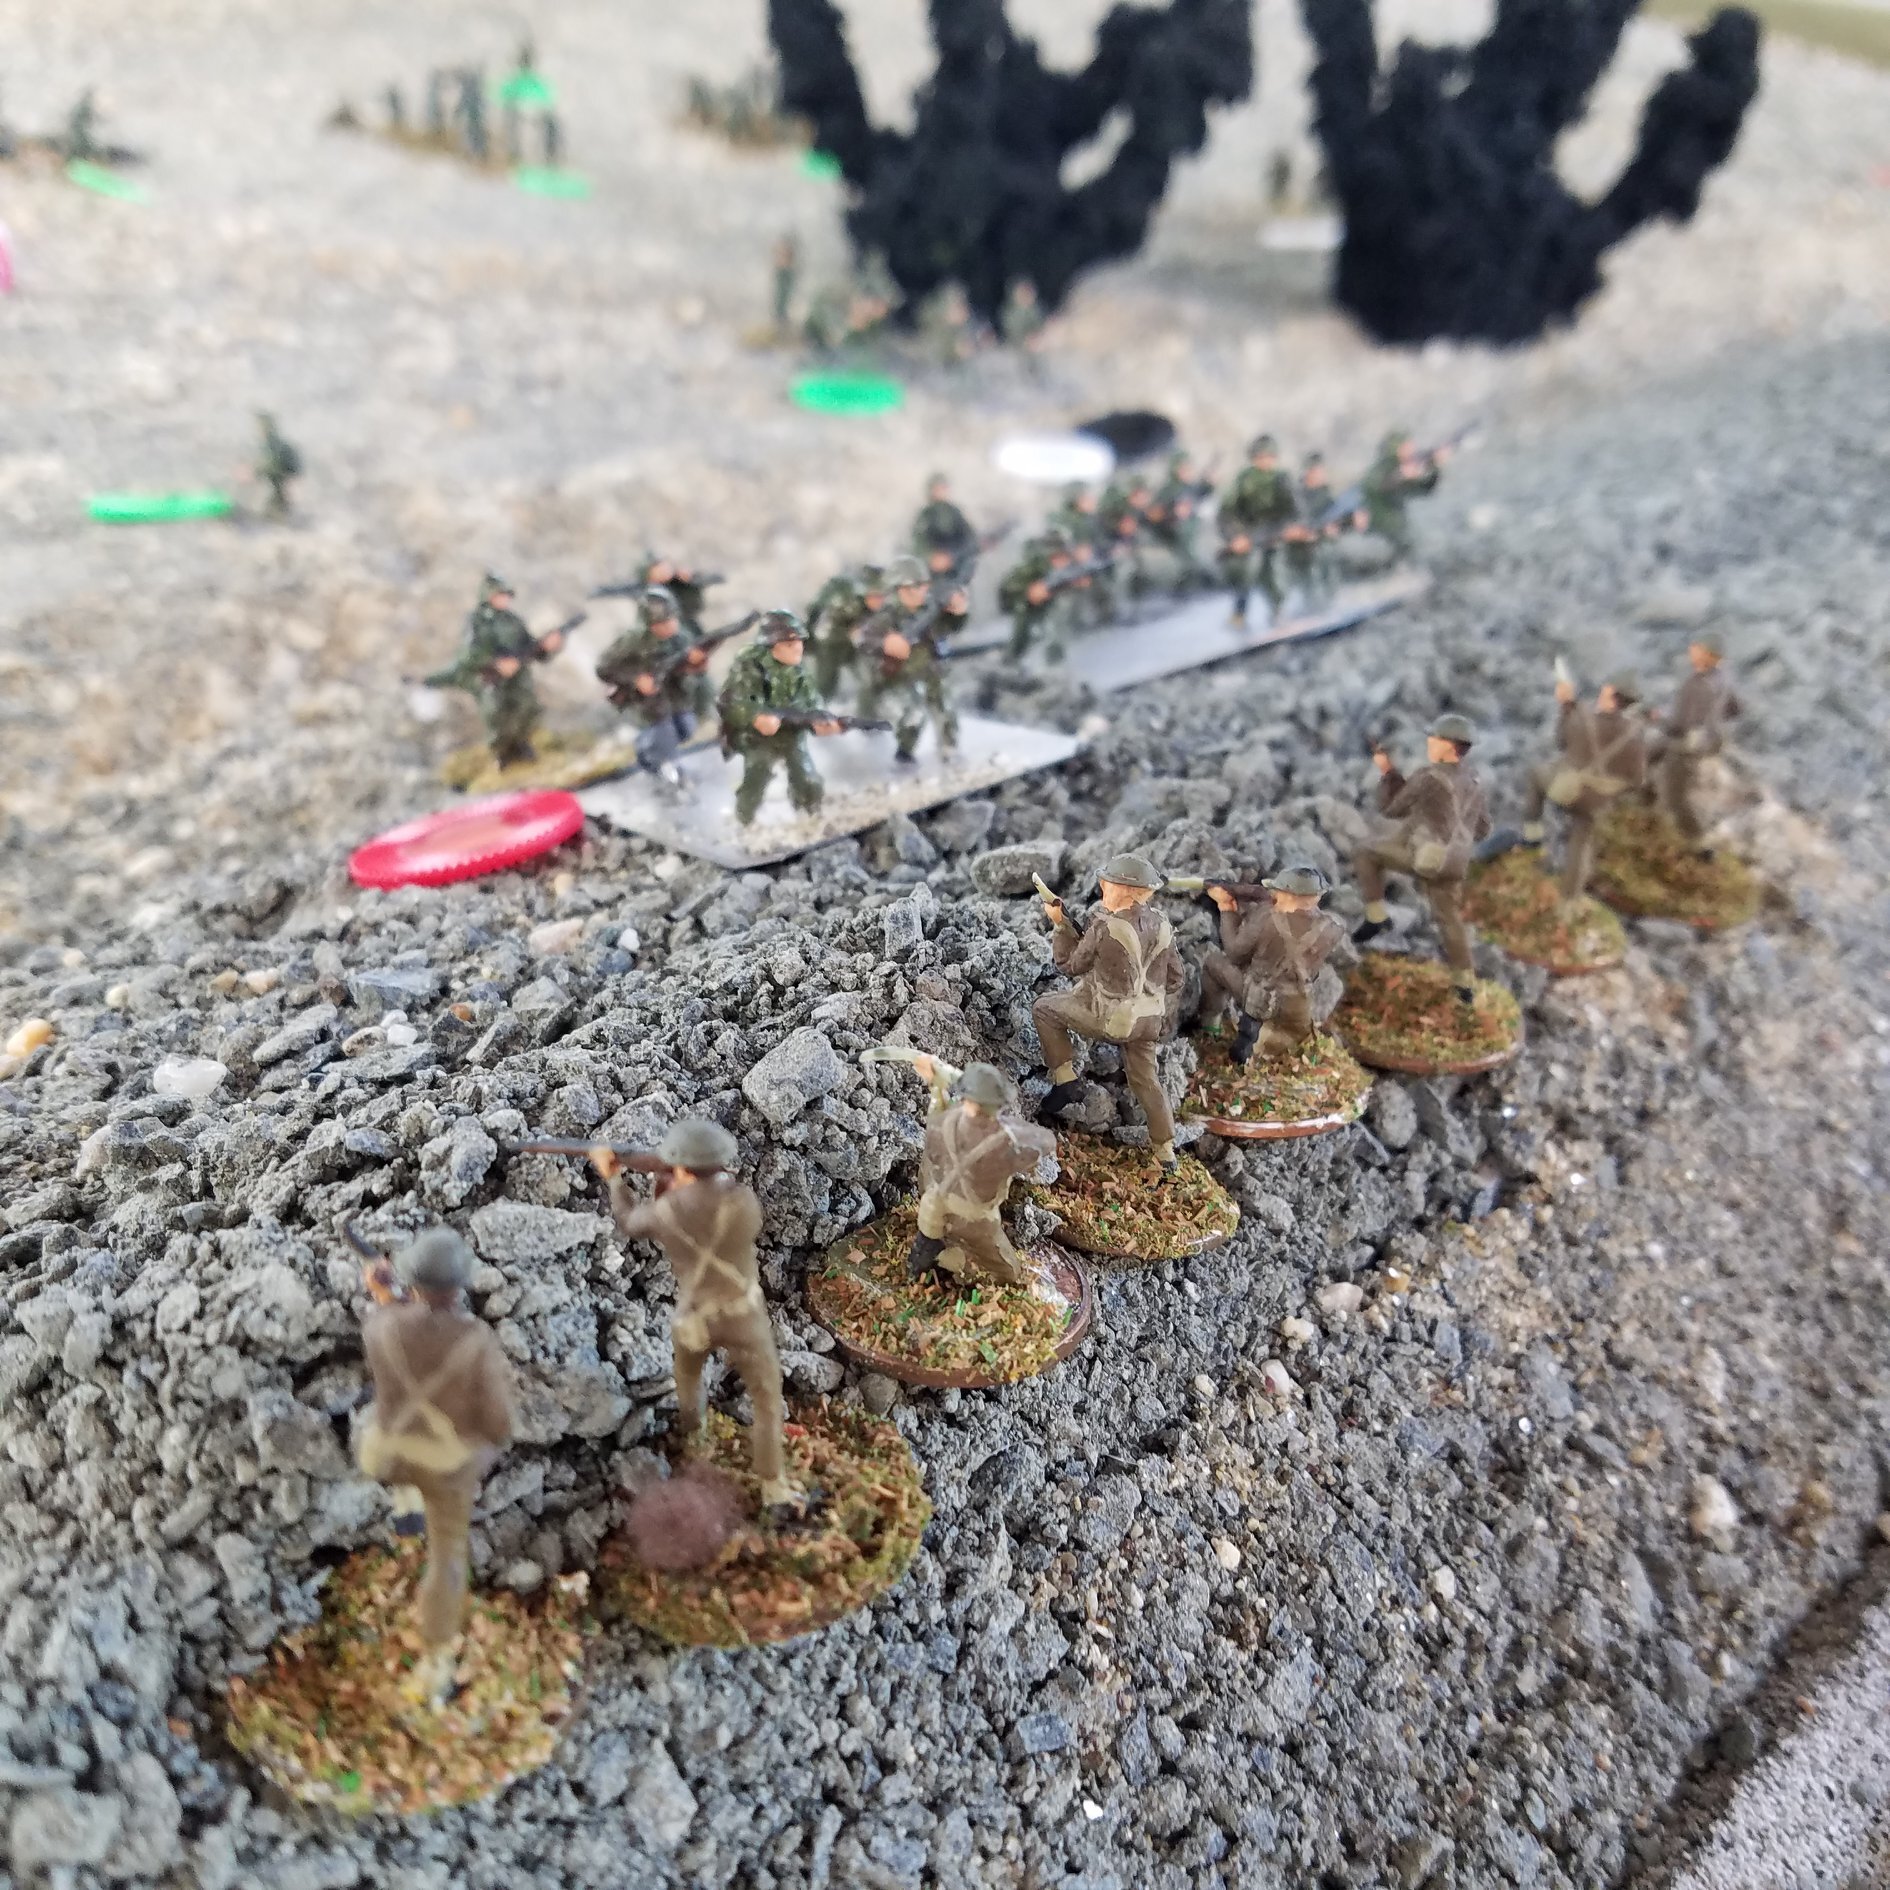 German grenadiers assault the guards on their left flank.